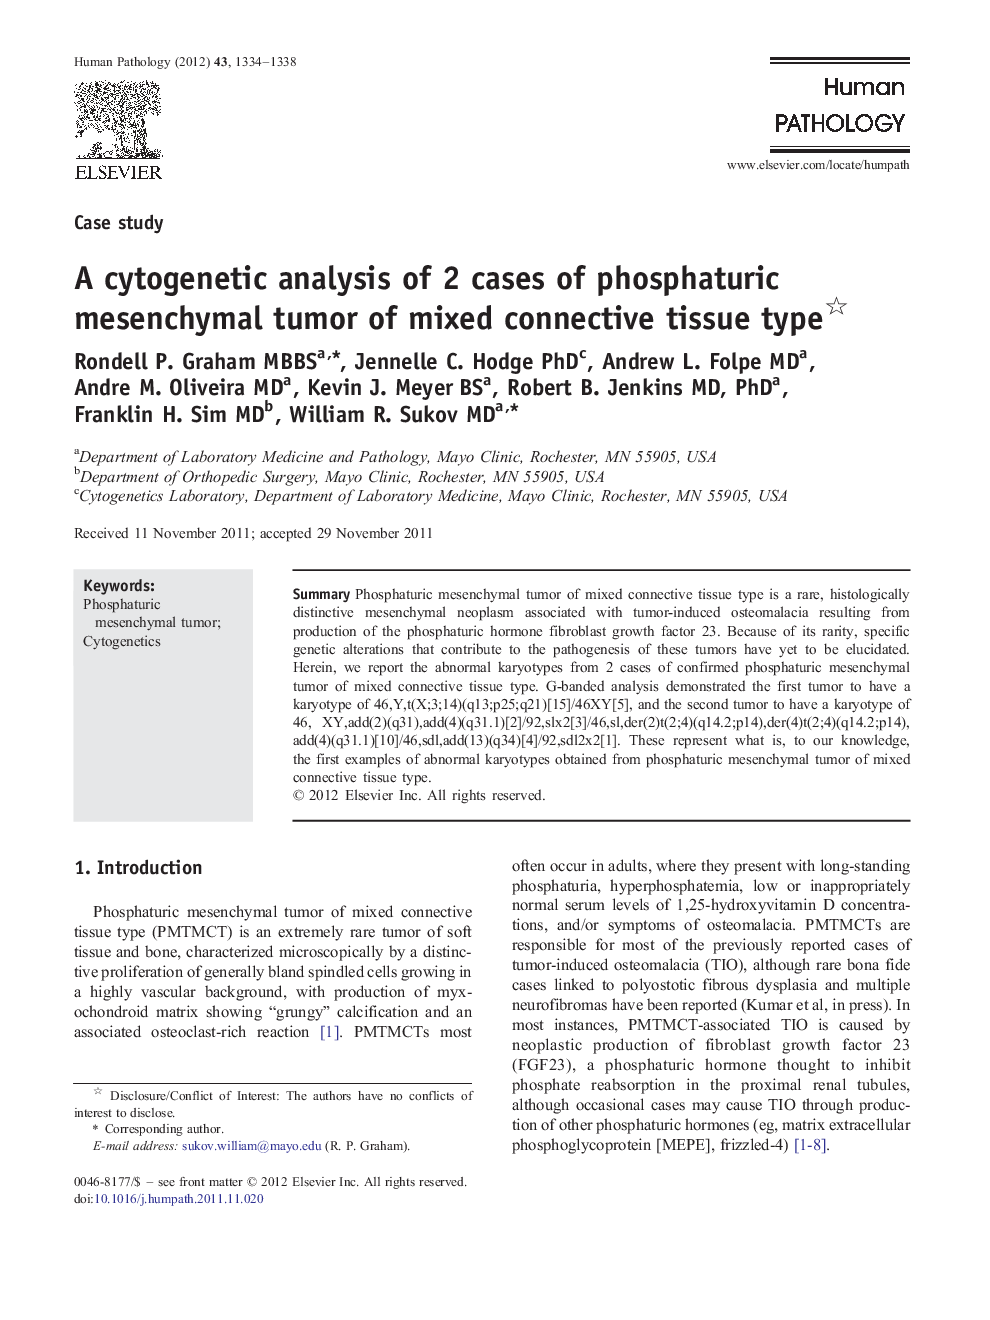 A cytogenetic analysis of 2 cases of phosphaturic mesenchymal tumor of mixed connective tissue type 